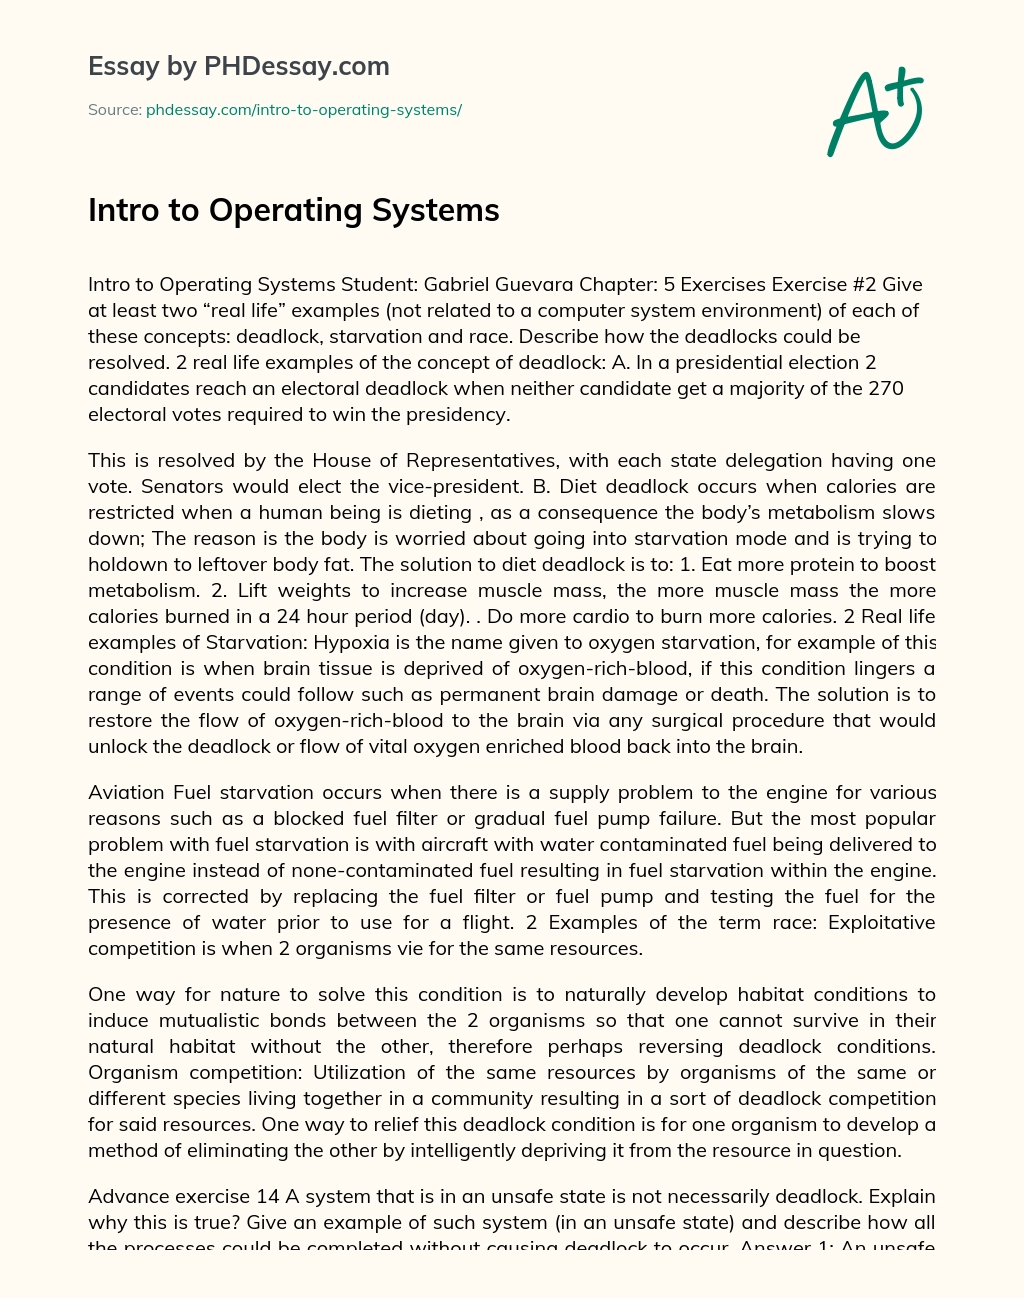 Intro to Operating Systems essay